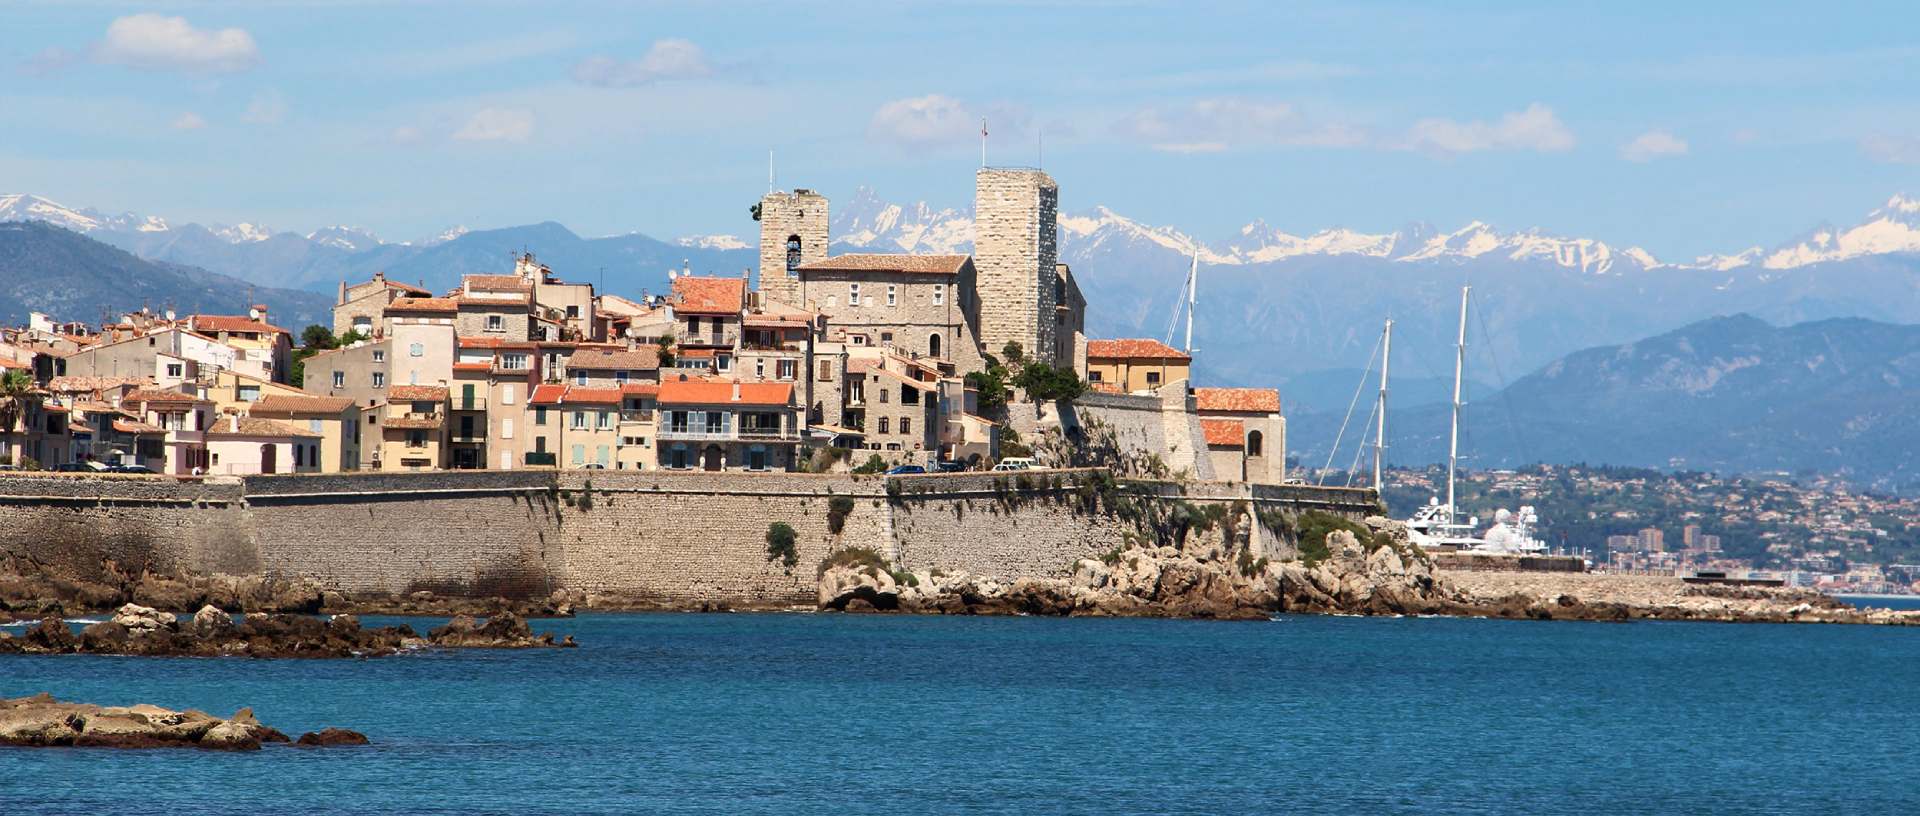 Cabinet expert comptable et audit a Antibes - Déclarations fiscales Antibes